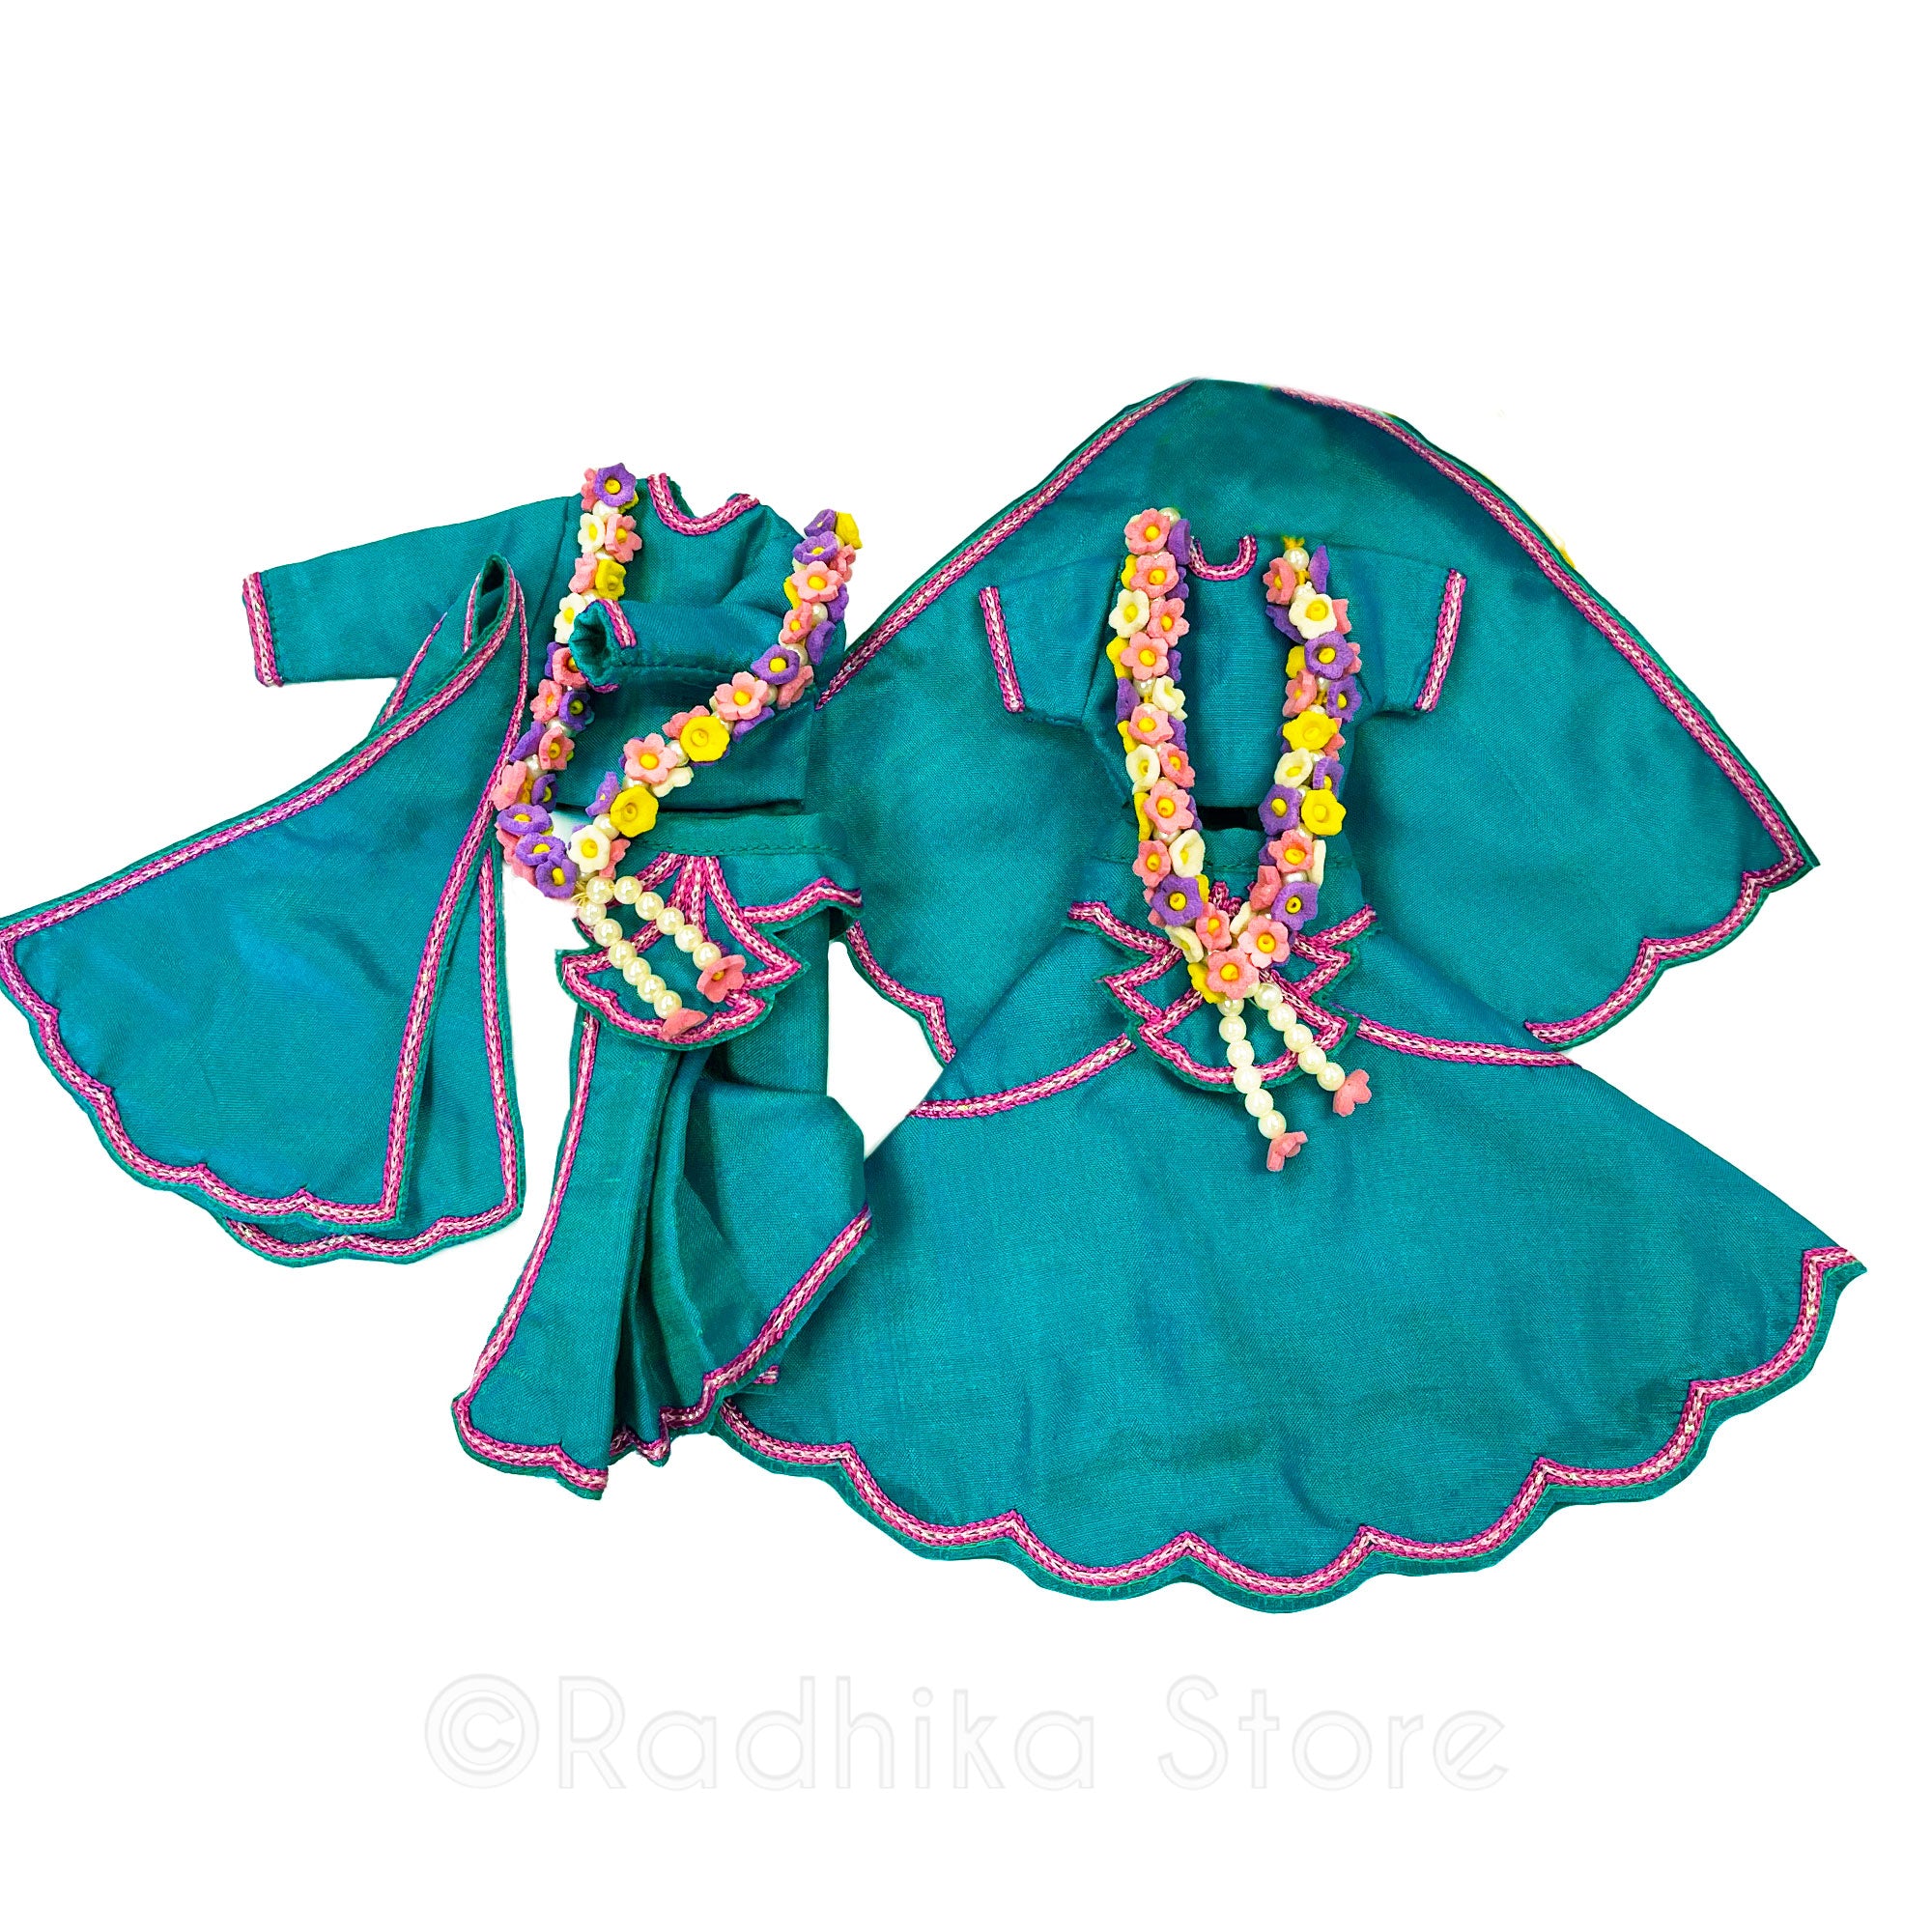 Oceans Of Mercy - Silk - Deep Teal Blue and Pink - Radha Krishna Deity Outfit